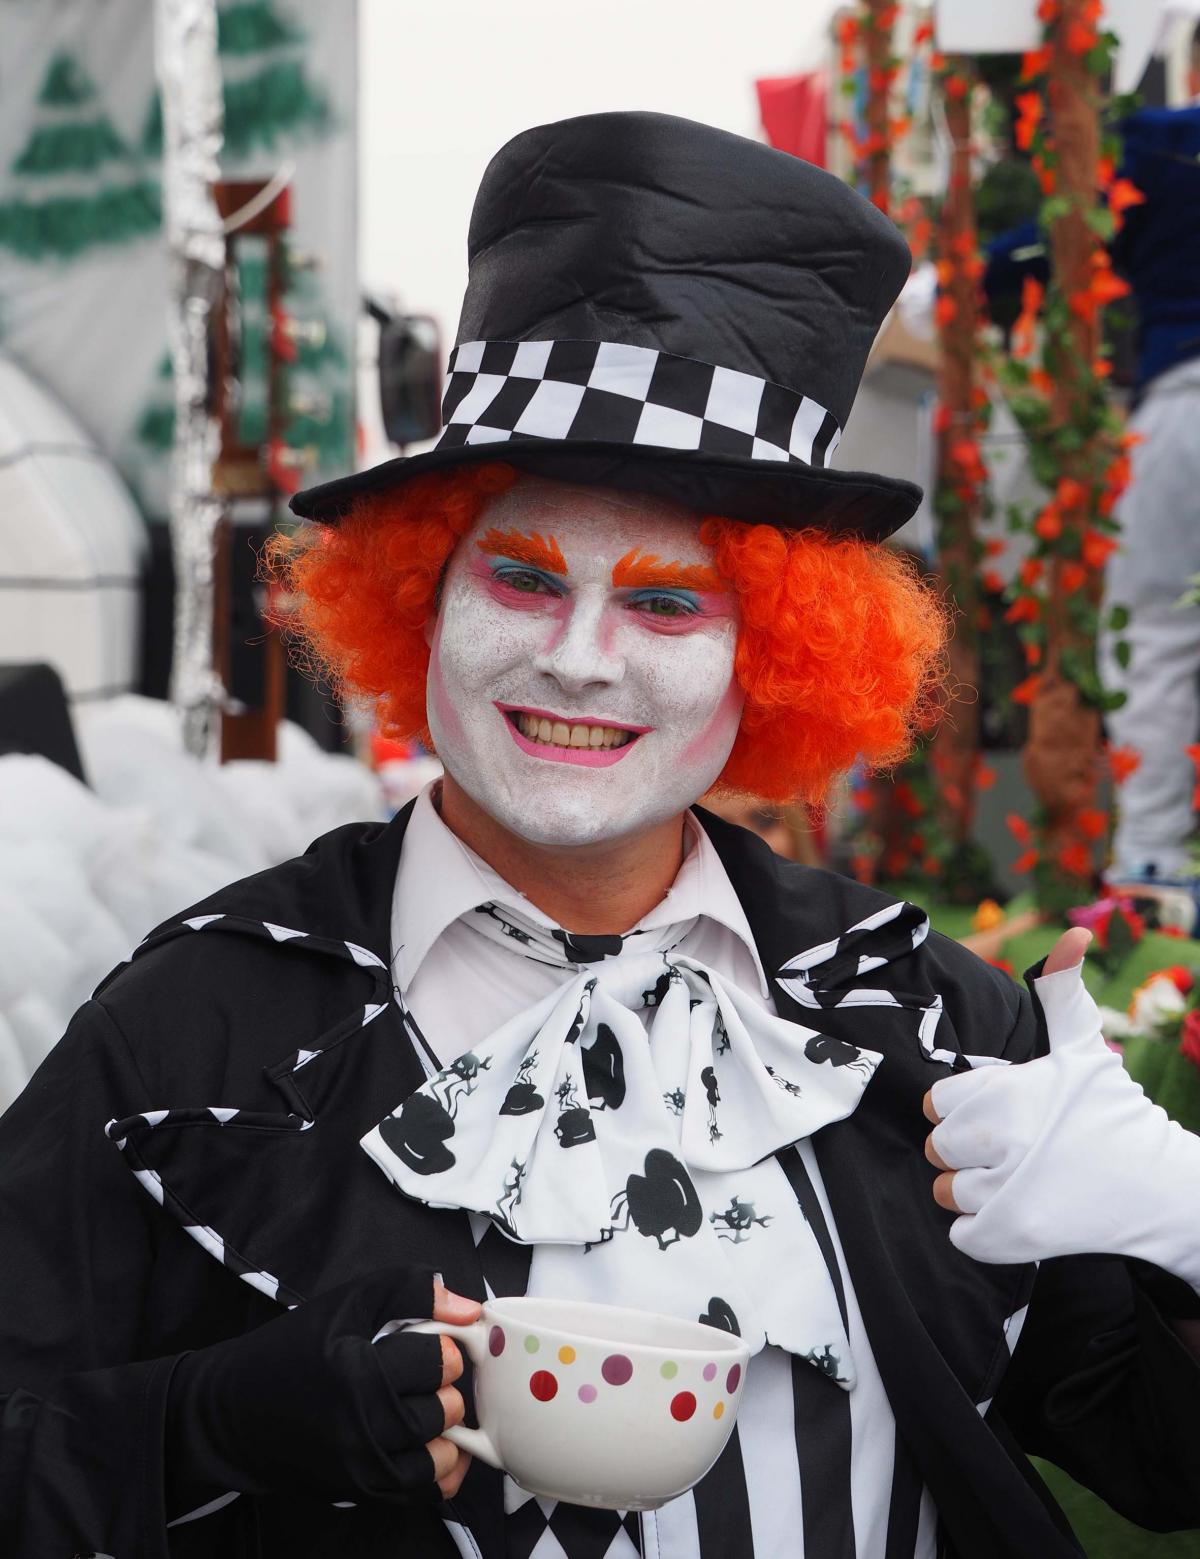 DOWN THE RABBIT HOLE: Mad Hatter Matthew Blanthorn PICTURE: Dorset Media Service